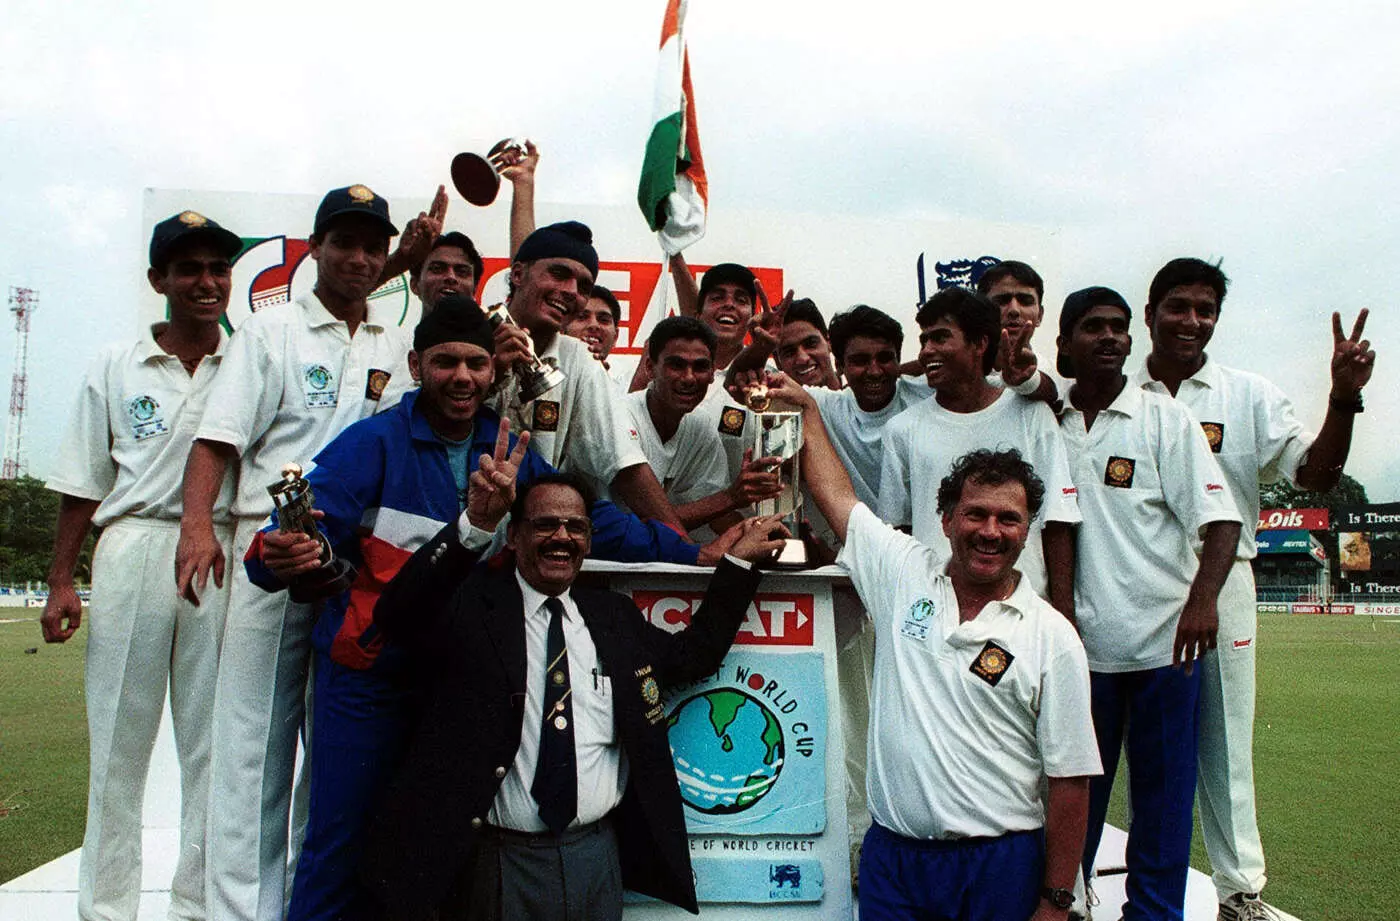 Yuvraj Singh and Mohammed Kaif were a part of this historic team(cricinfo)